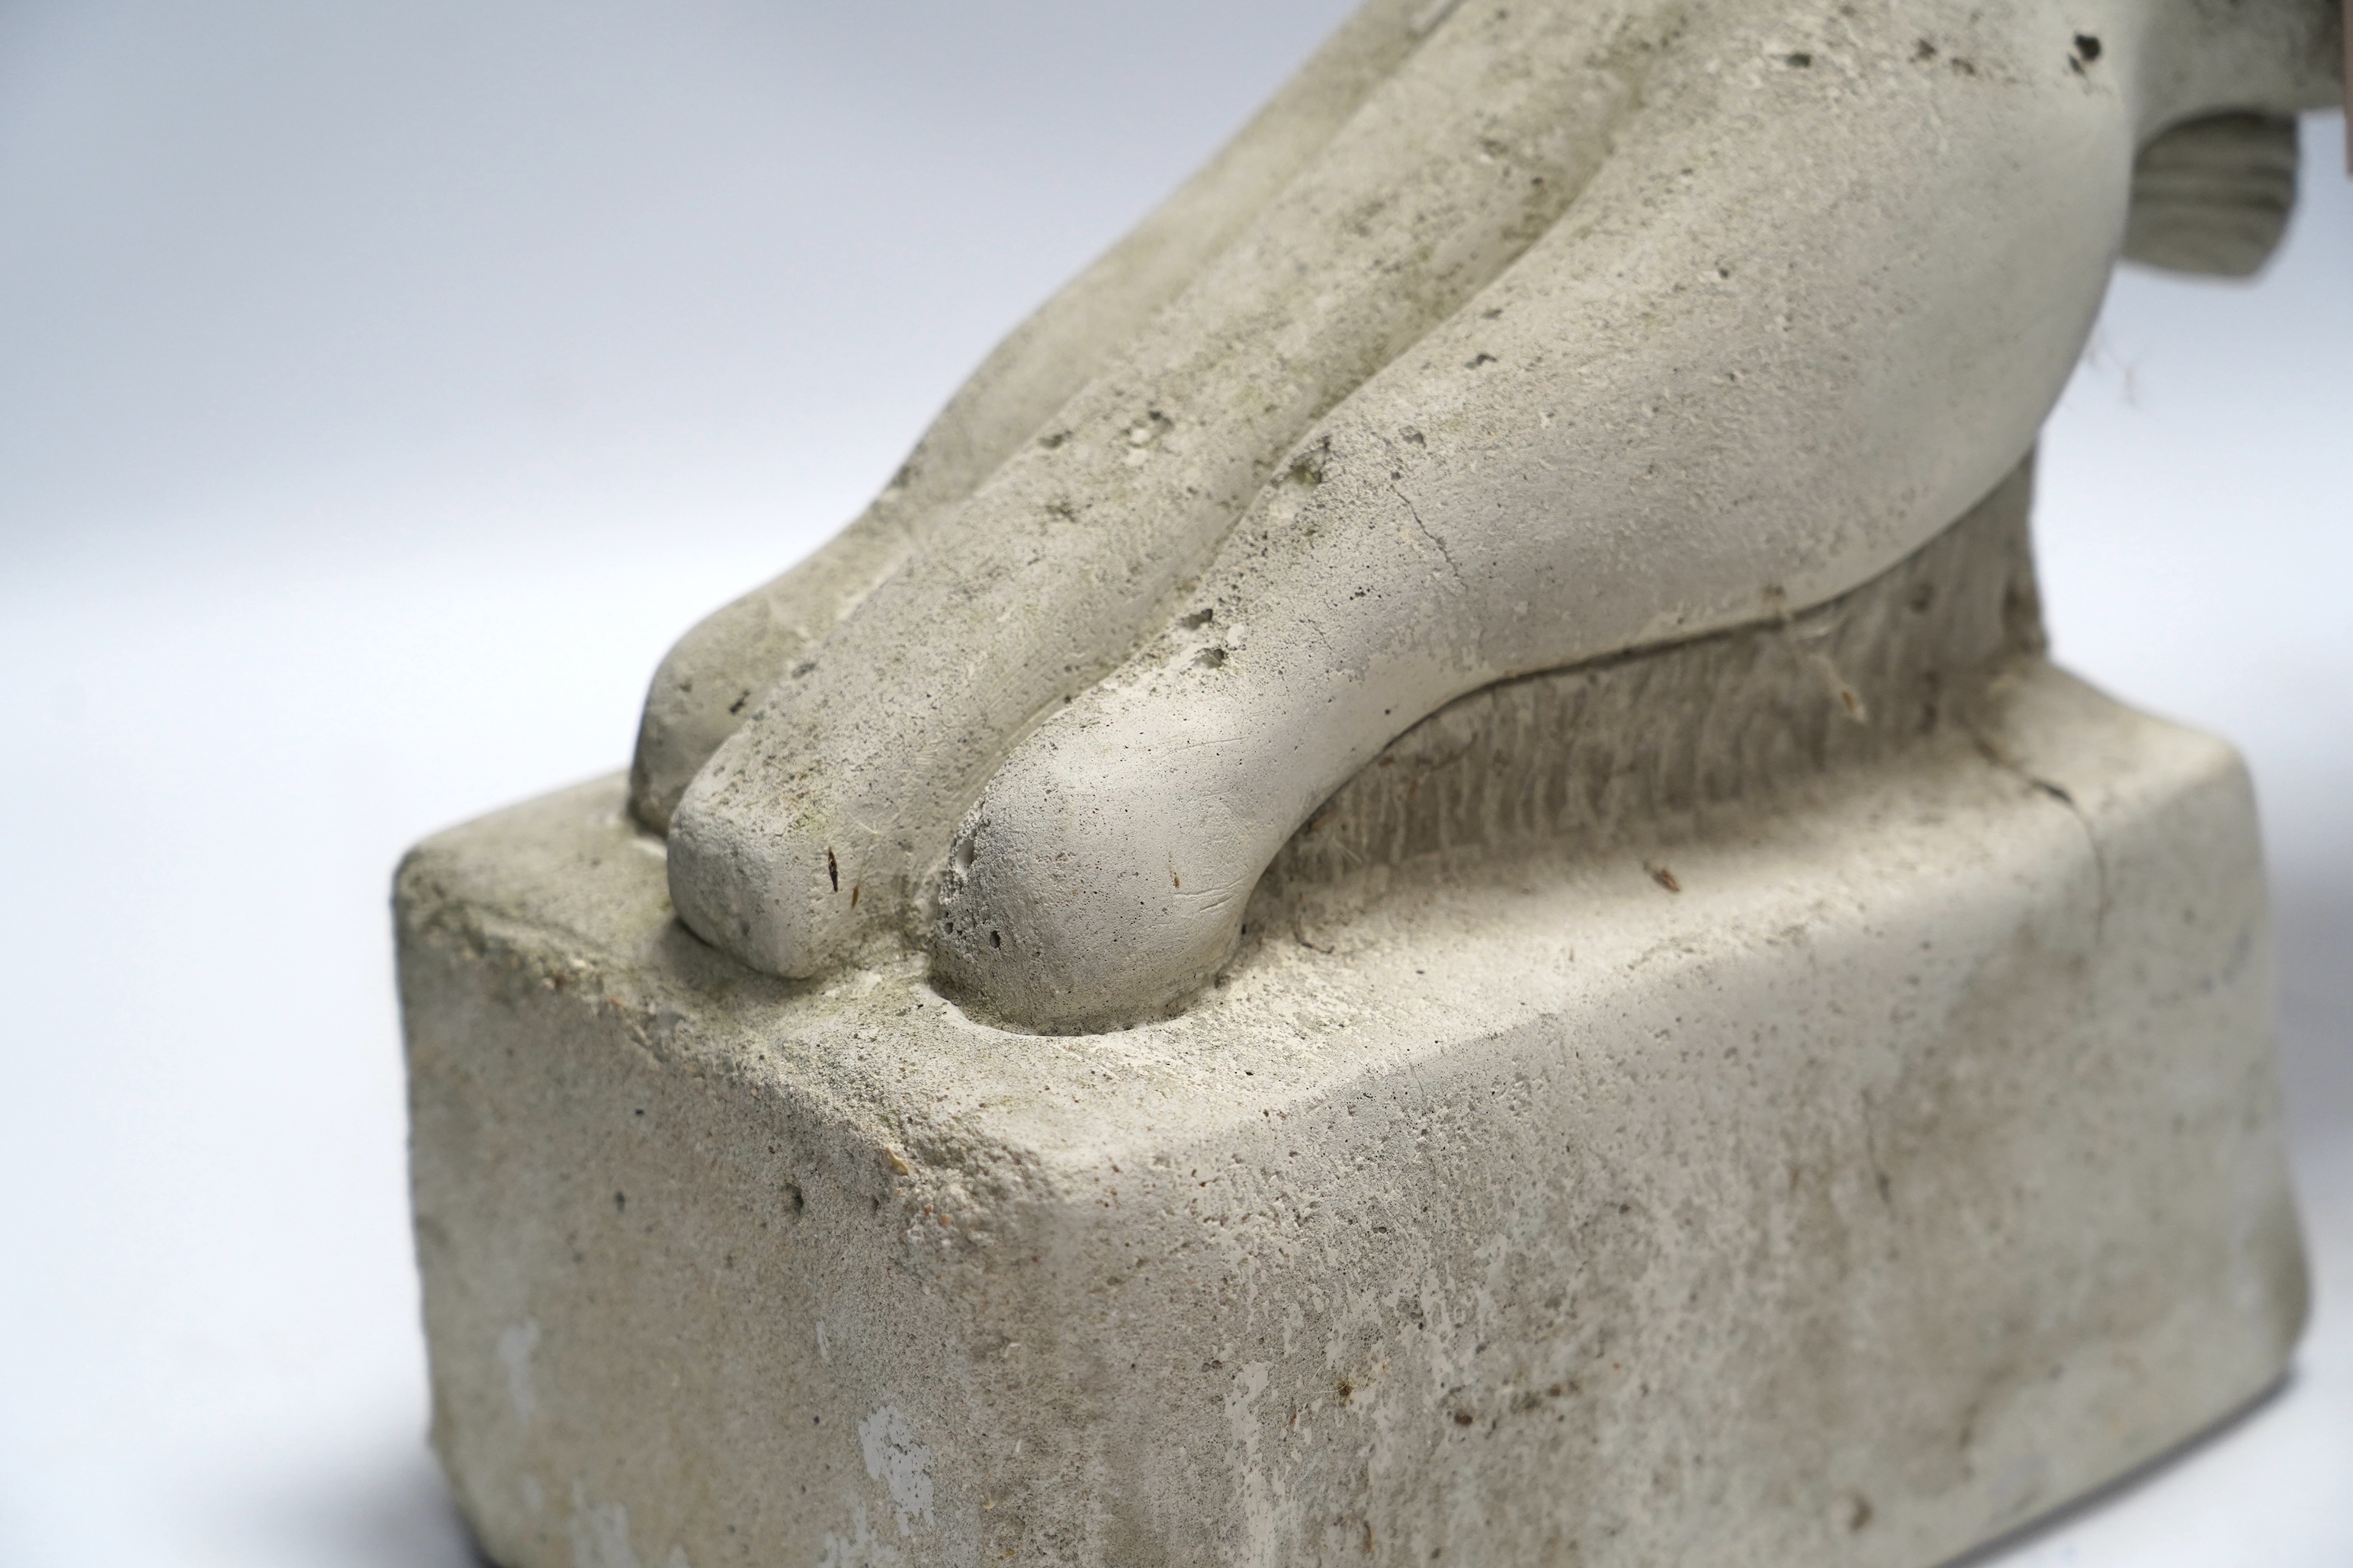 A reconstituted stone ‘Leaping Jaguar’ mascot, 37cm high